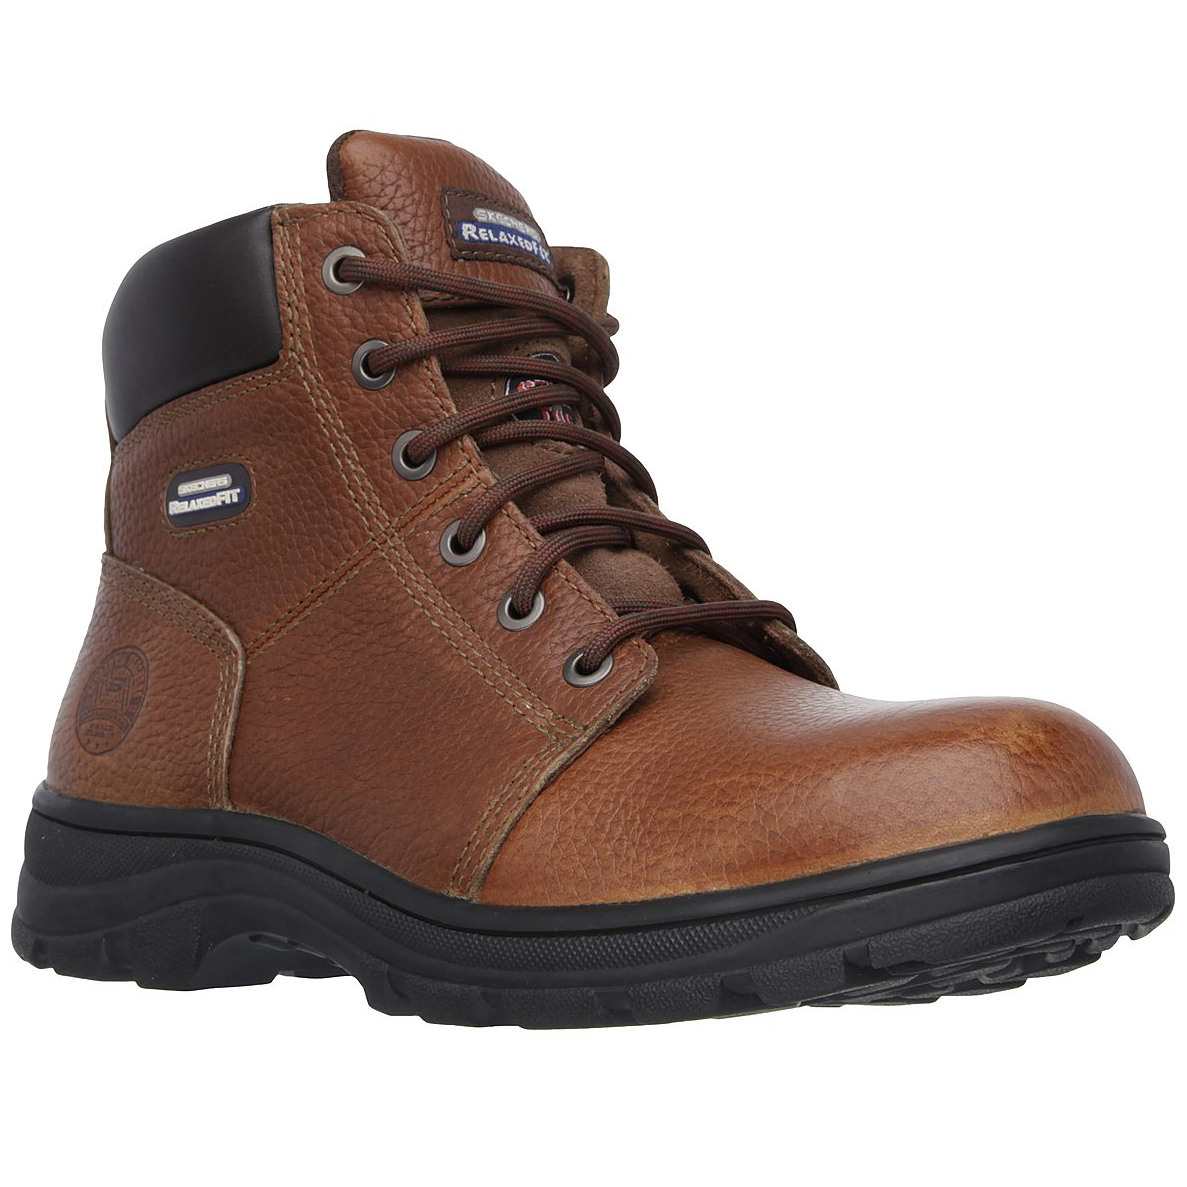 Skechers Men's 6 In. Work: Relaxed Fit - Workshire Steel Toe Work Boots - Brown, 10